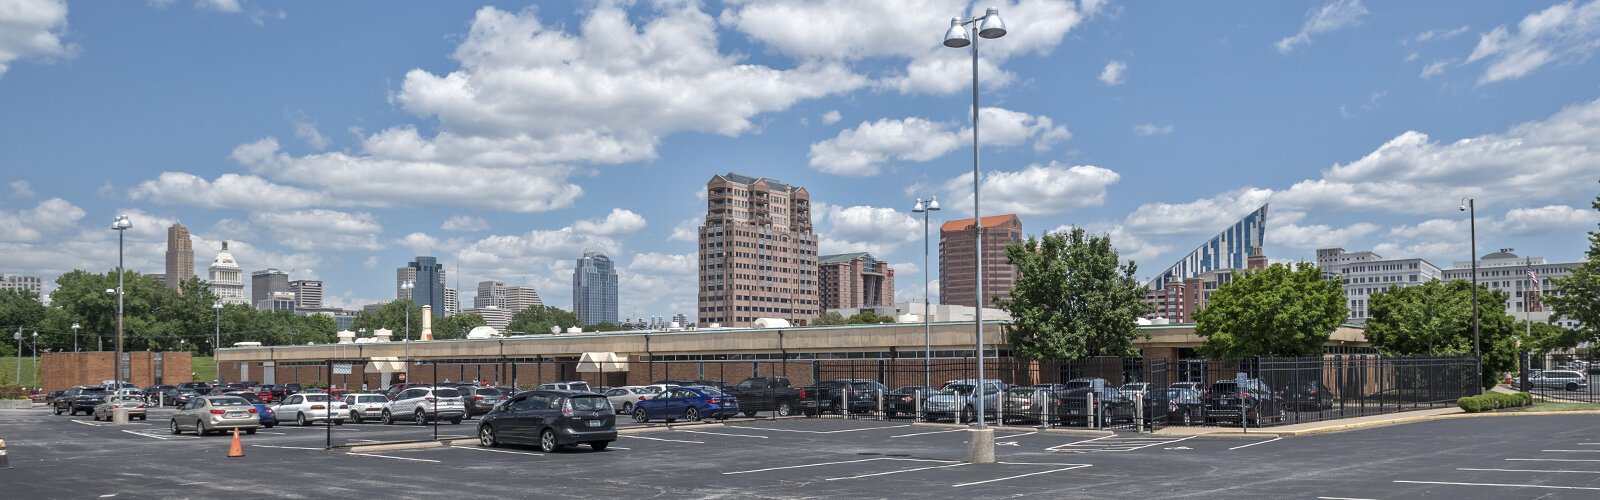 Located in the urban core, next to the Ohio River, the IRS site presents an opportunity to redefine Covington's city center.